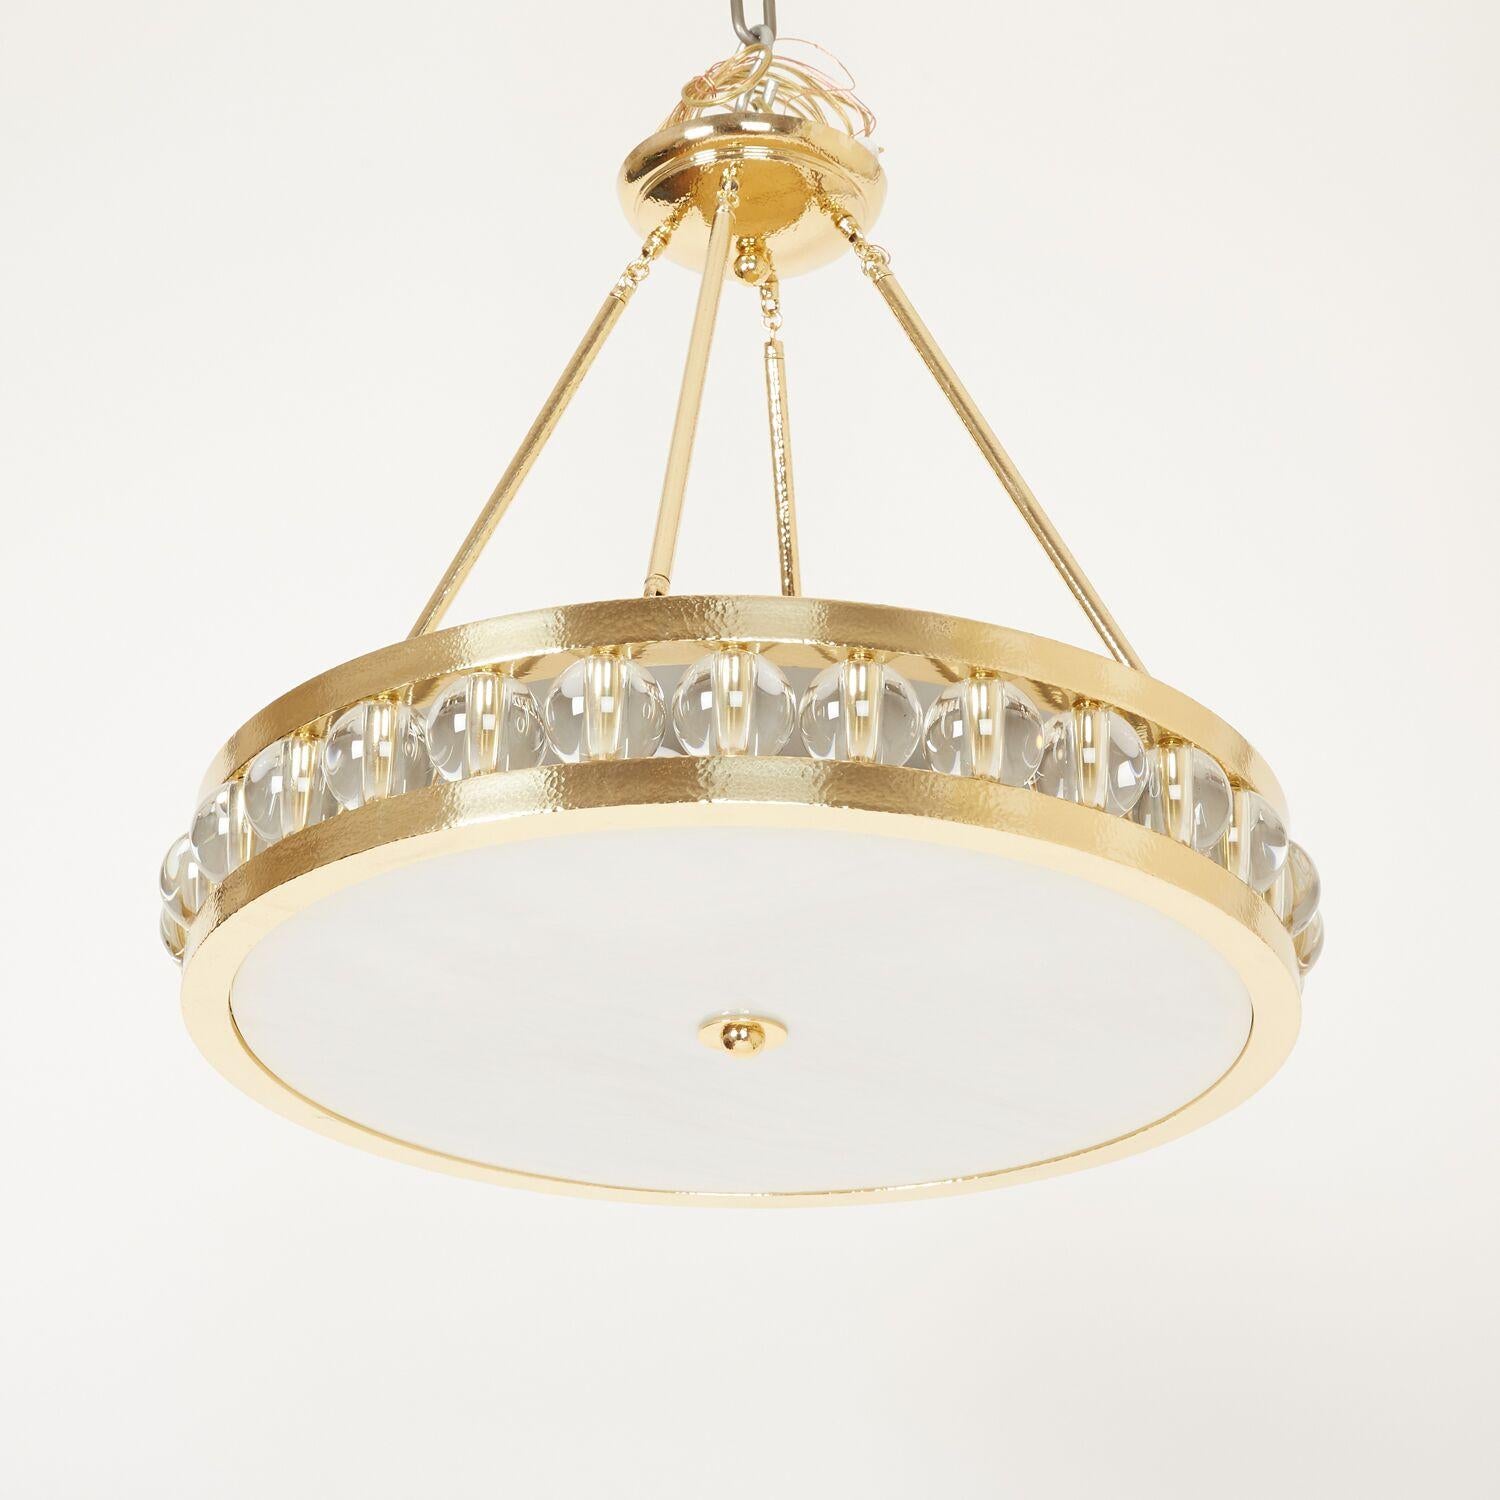 Hammered Tambour Pendant Light in Brass by David Duncan In New Condition For Sale In New York, NY